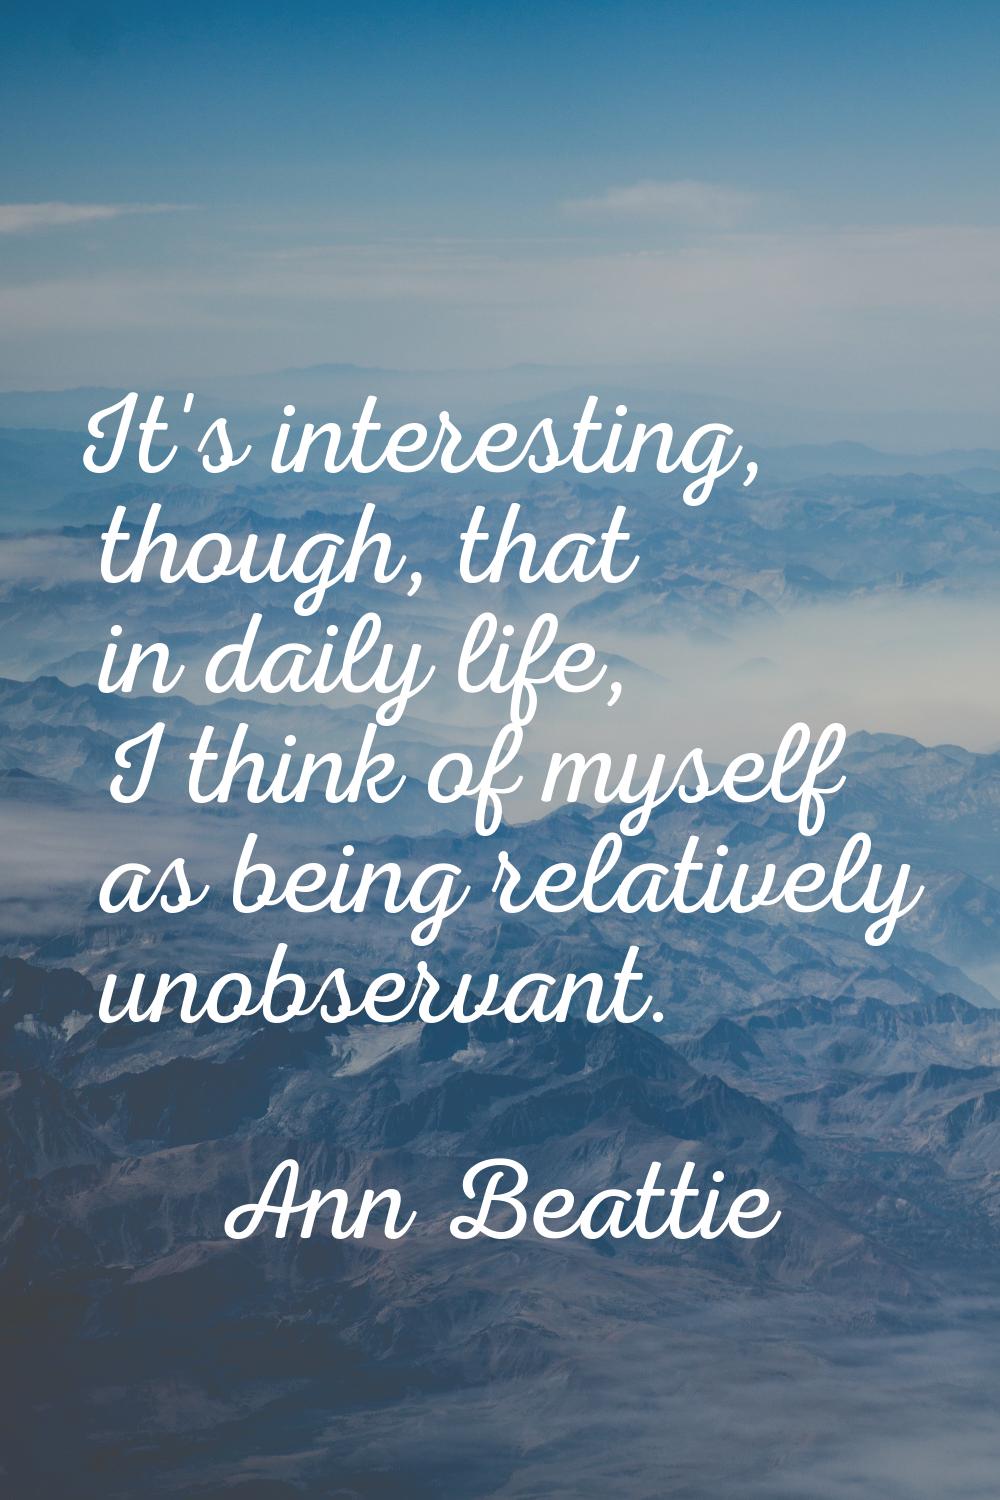 It's interesting, though, that in daily life, I think of myself as being relatively unobservant.